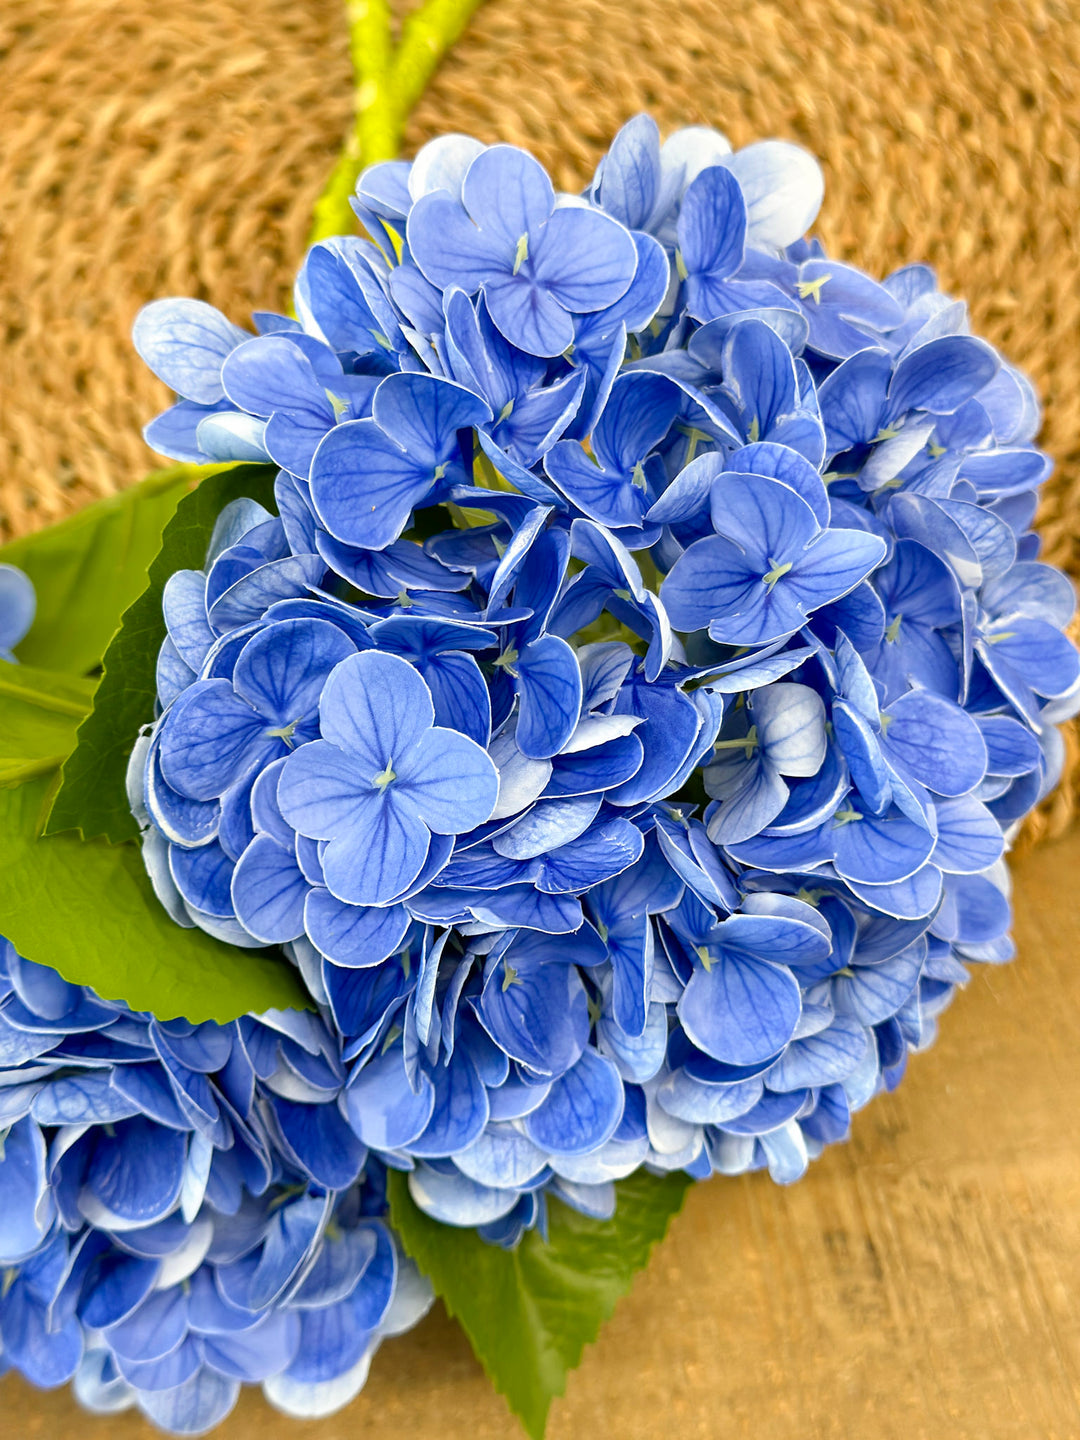 Real Touch Light Blue Hydrangea